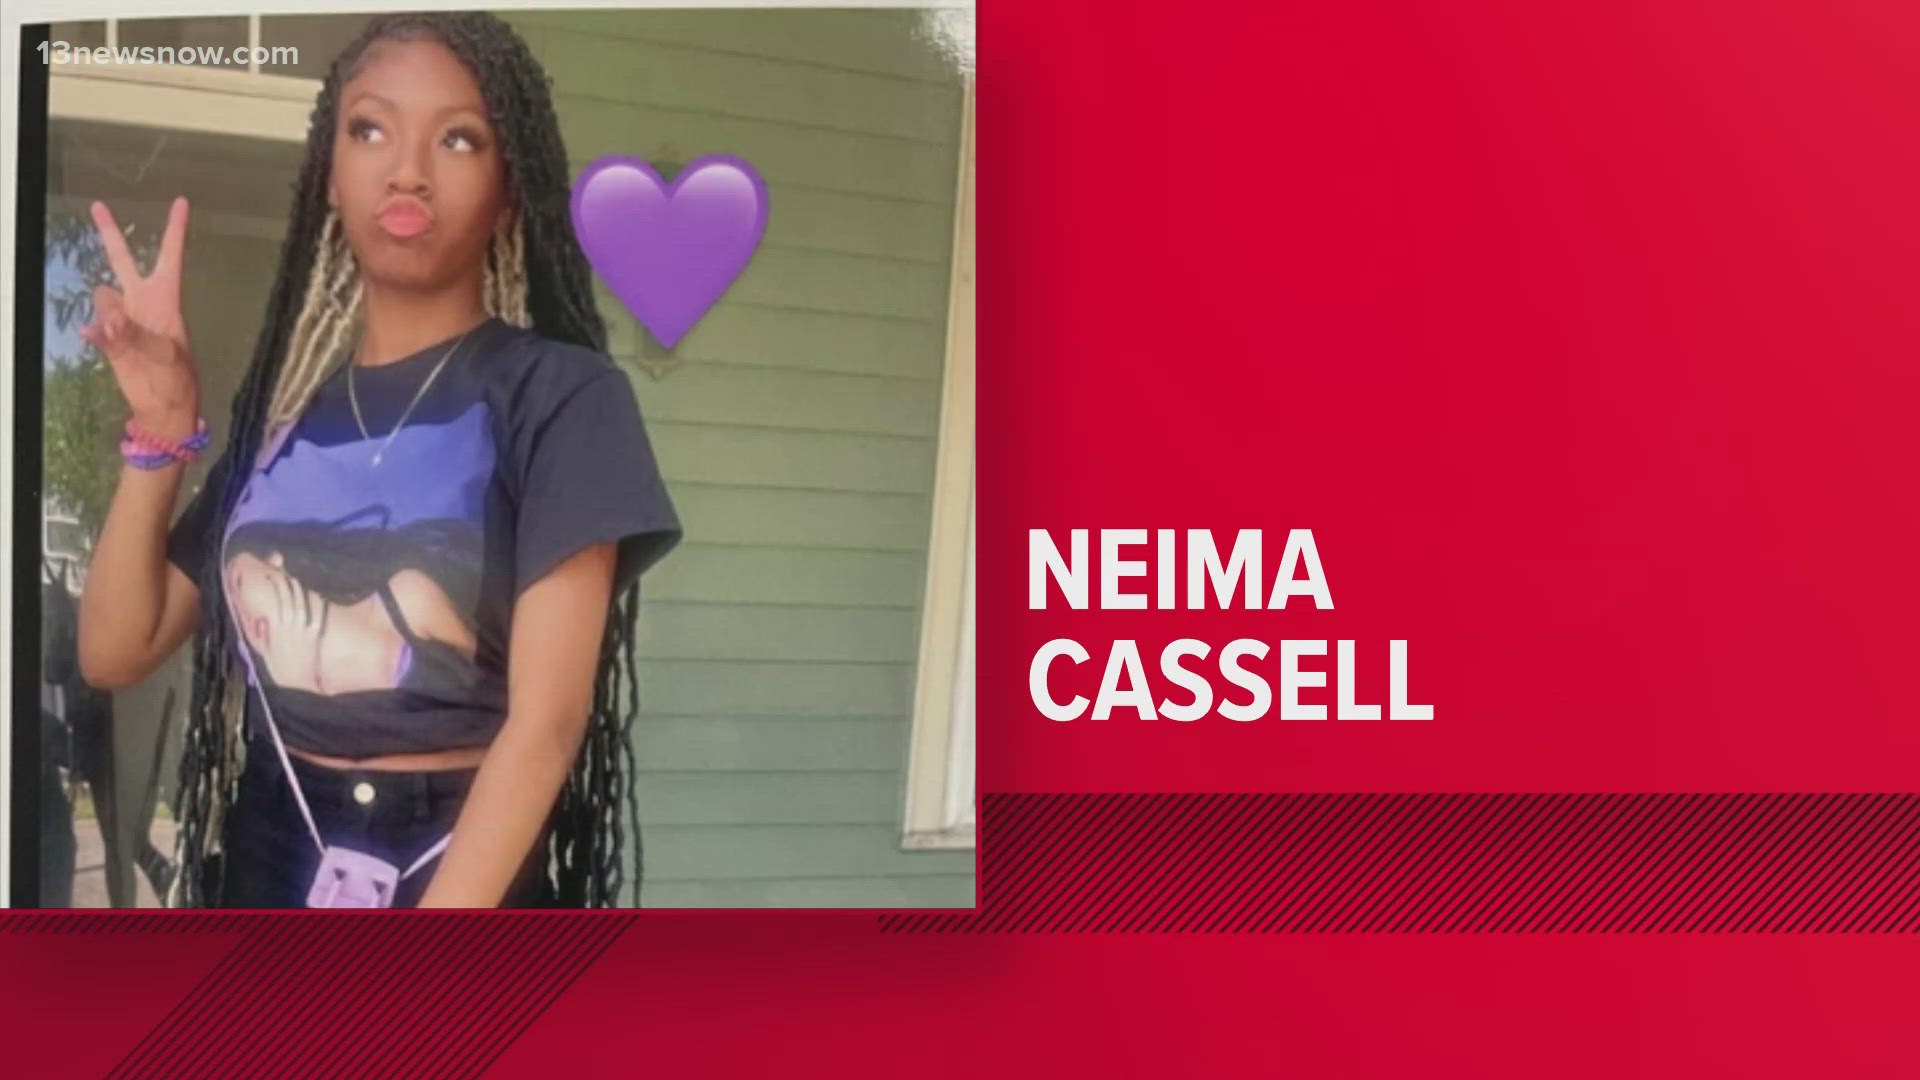 Portsmouth police say they have reason to believe Neima Cassell may have been abducted.